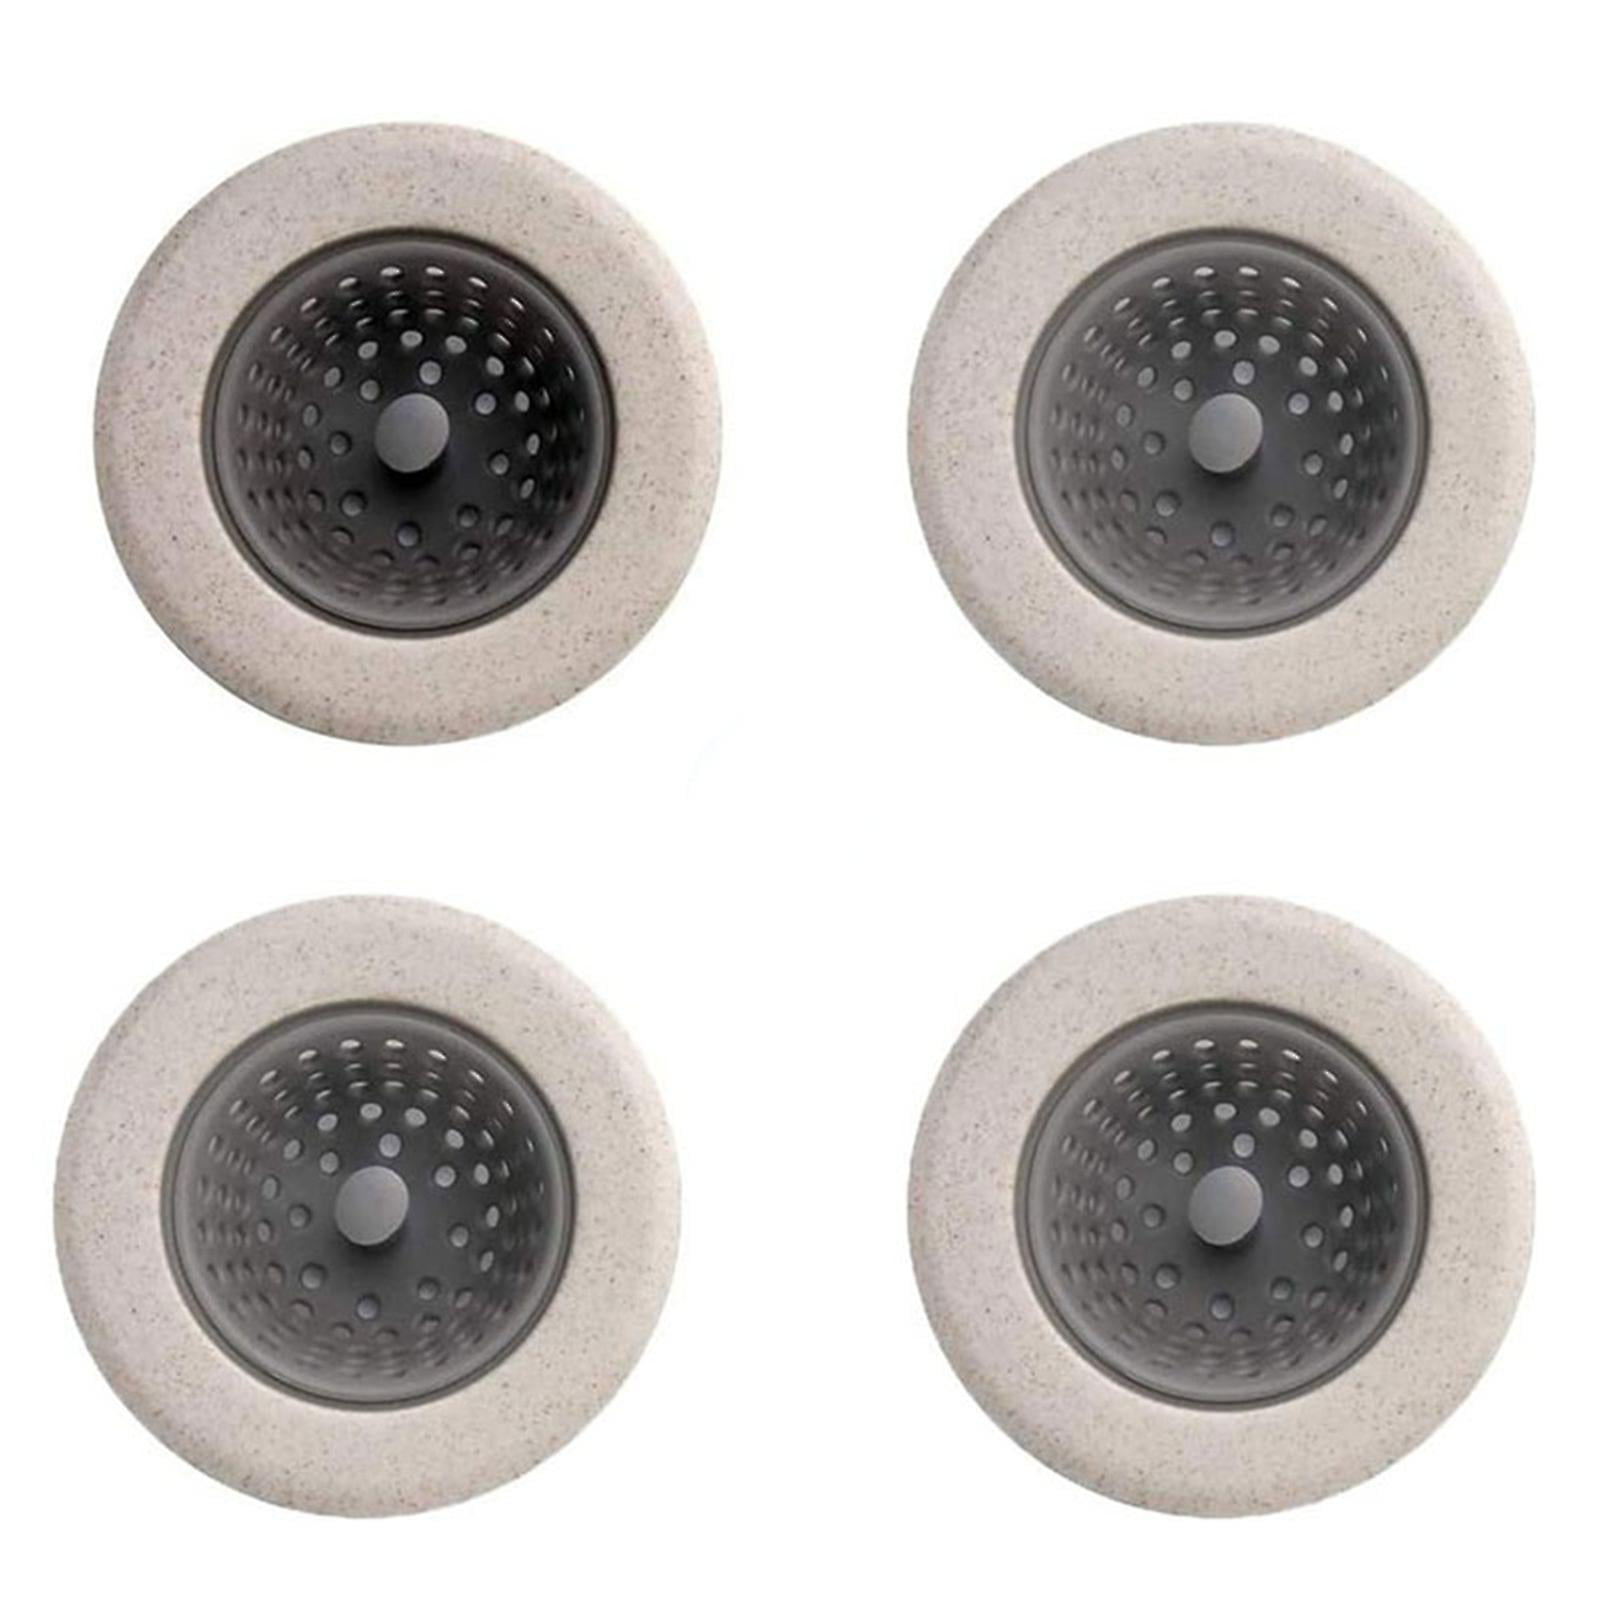 Kitchen Sink Strainer And Stopper Combo Basket Replacement Kitchen Sink Drain Strainer And Stopper for Garbage Disposal beootcr 4 PCS Anti Clog Flexible Sink Strainer 